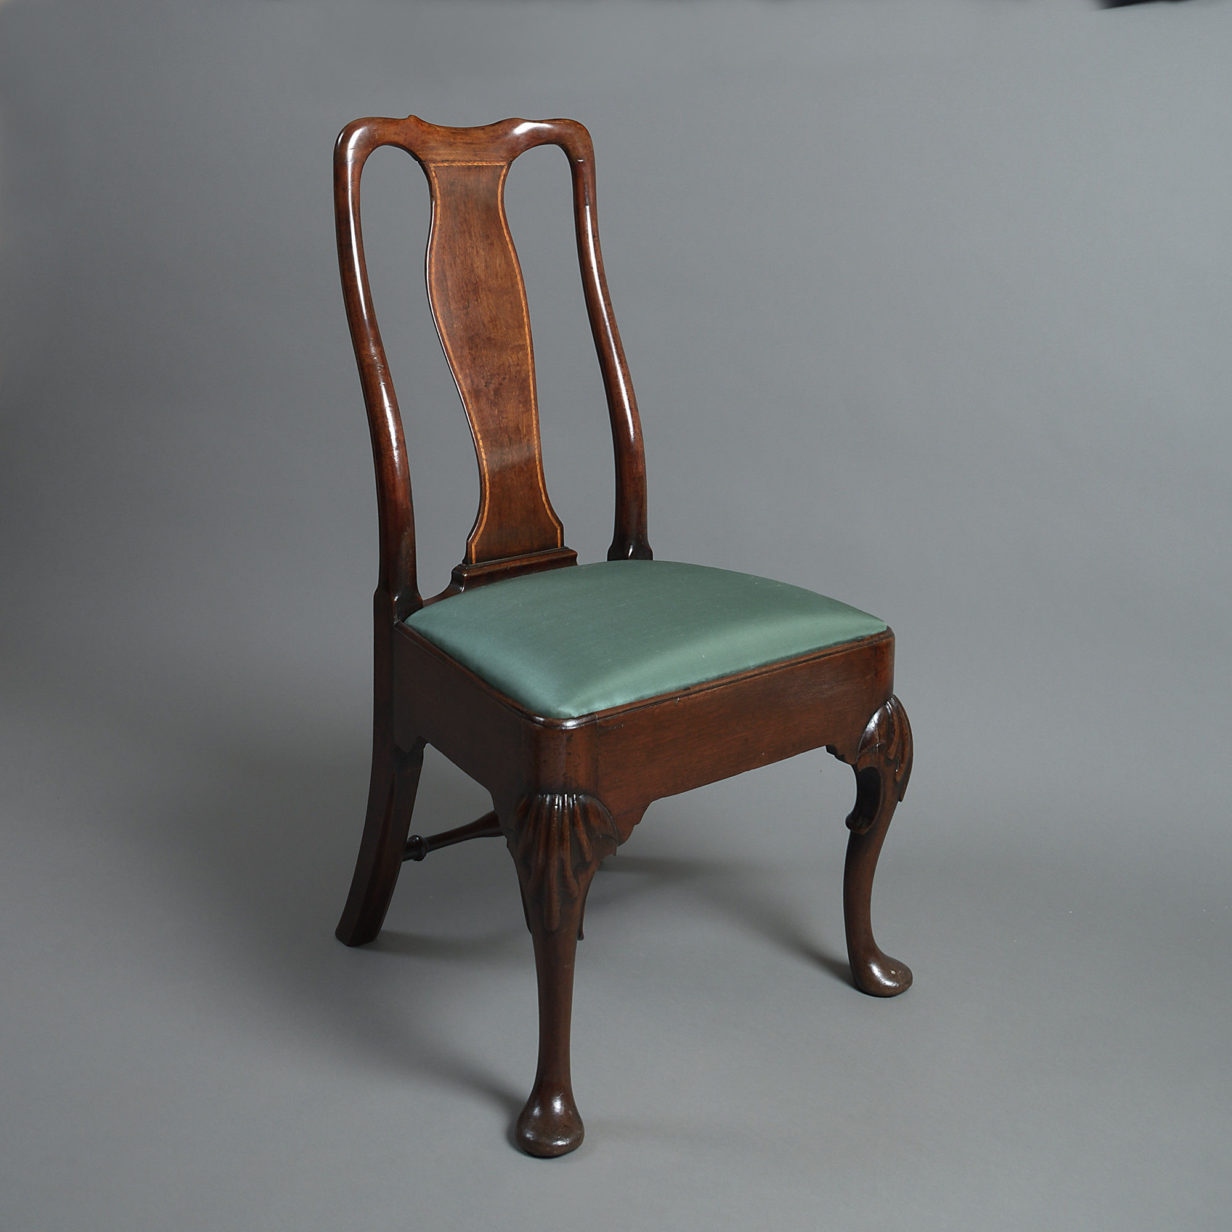 An 18th century set of four george ii period walnut side chairs